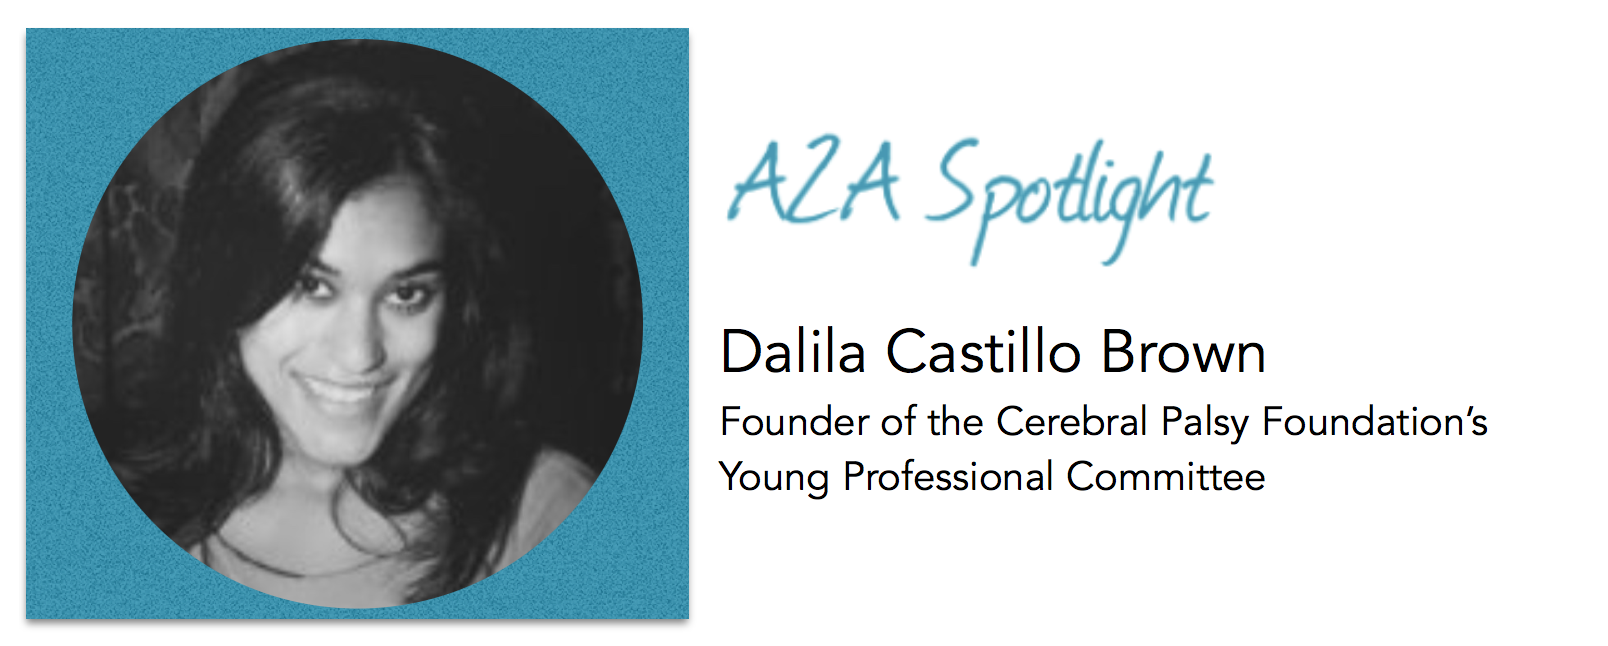 Spotlight – Dalila Castillo Brown Discovered She Was Born With Cerebral Palsy When She Was in Her Mid-Twenties